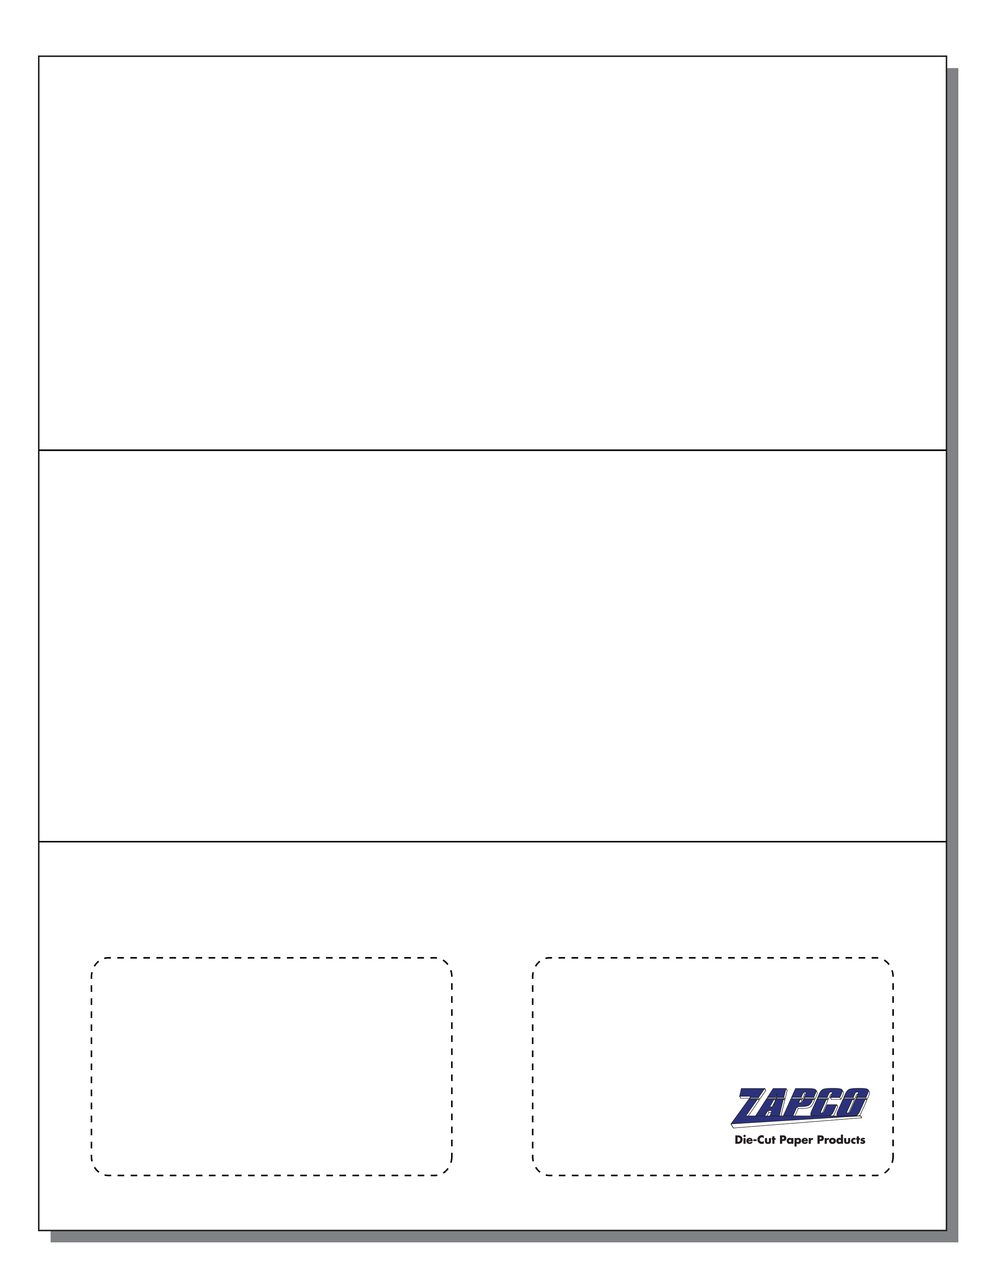 Item 100-2: 1-Up 8 1/2" x 3 2/3" Tri-Fold Mailer with Club Cards 8 1/2" x 11" Sheet(250 Sheets)